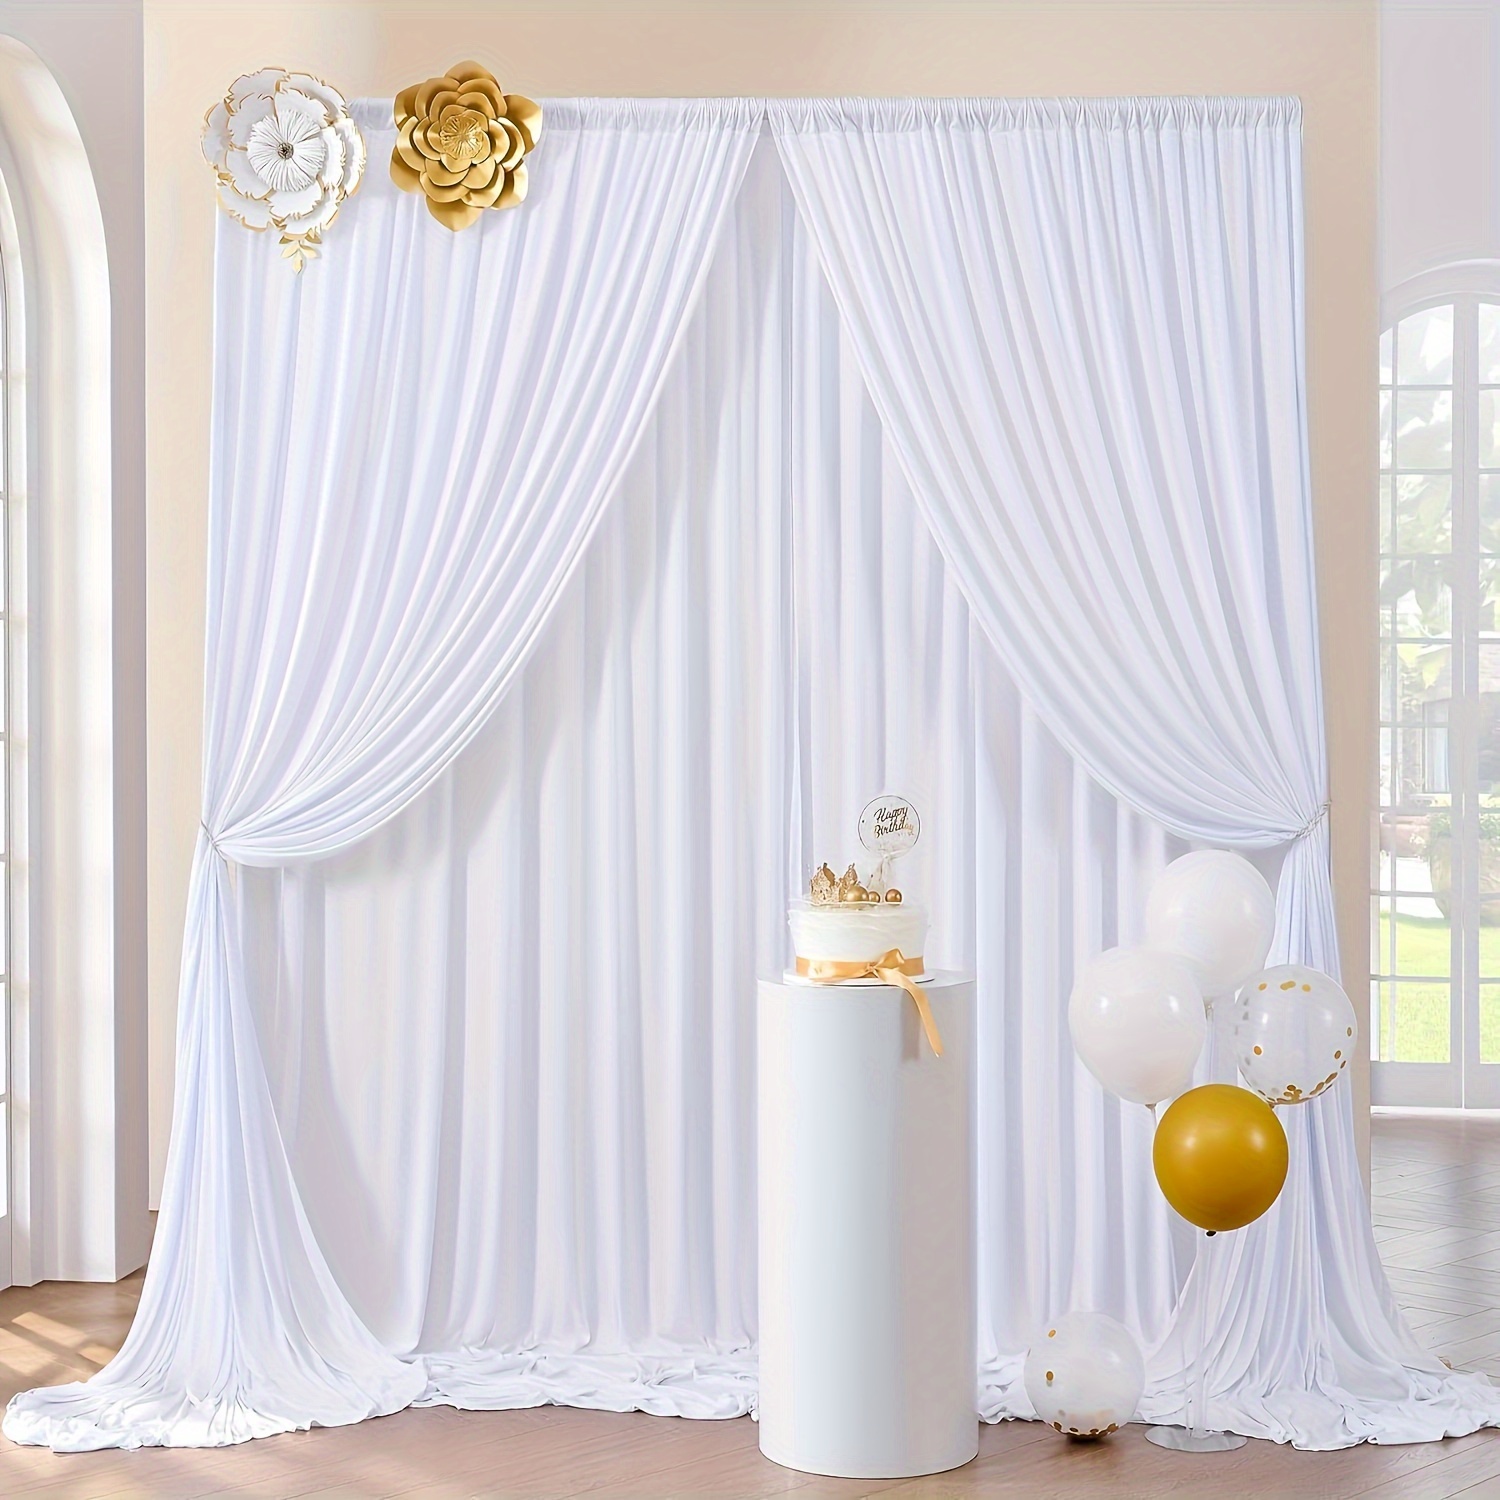 

4-piece White Backdrop Curtains 20ftx10ft - Versatile Polyester Panels For Weddings, Birthdays & Parties - Rod Pocket Design For Easy Setup